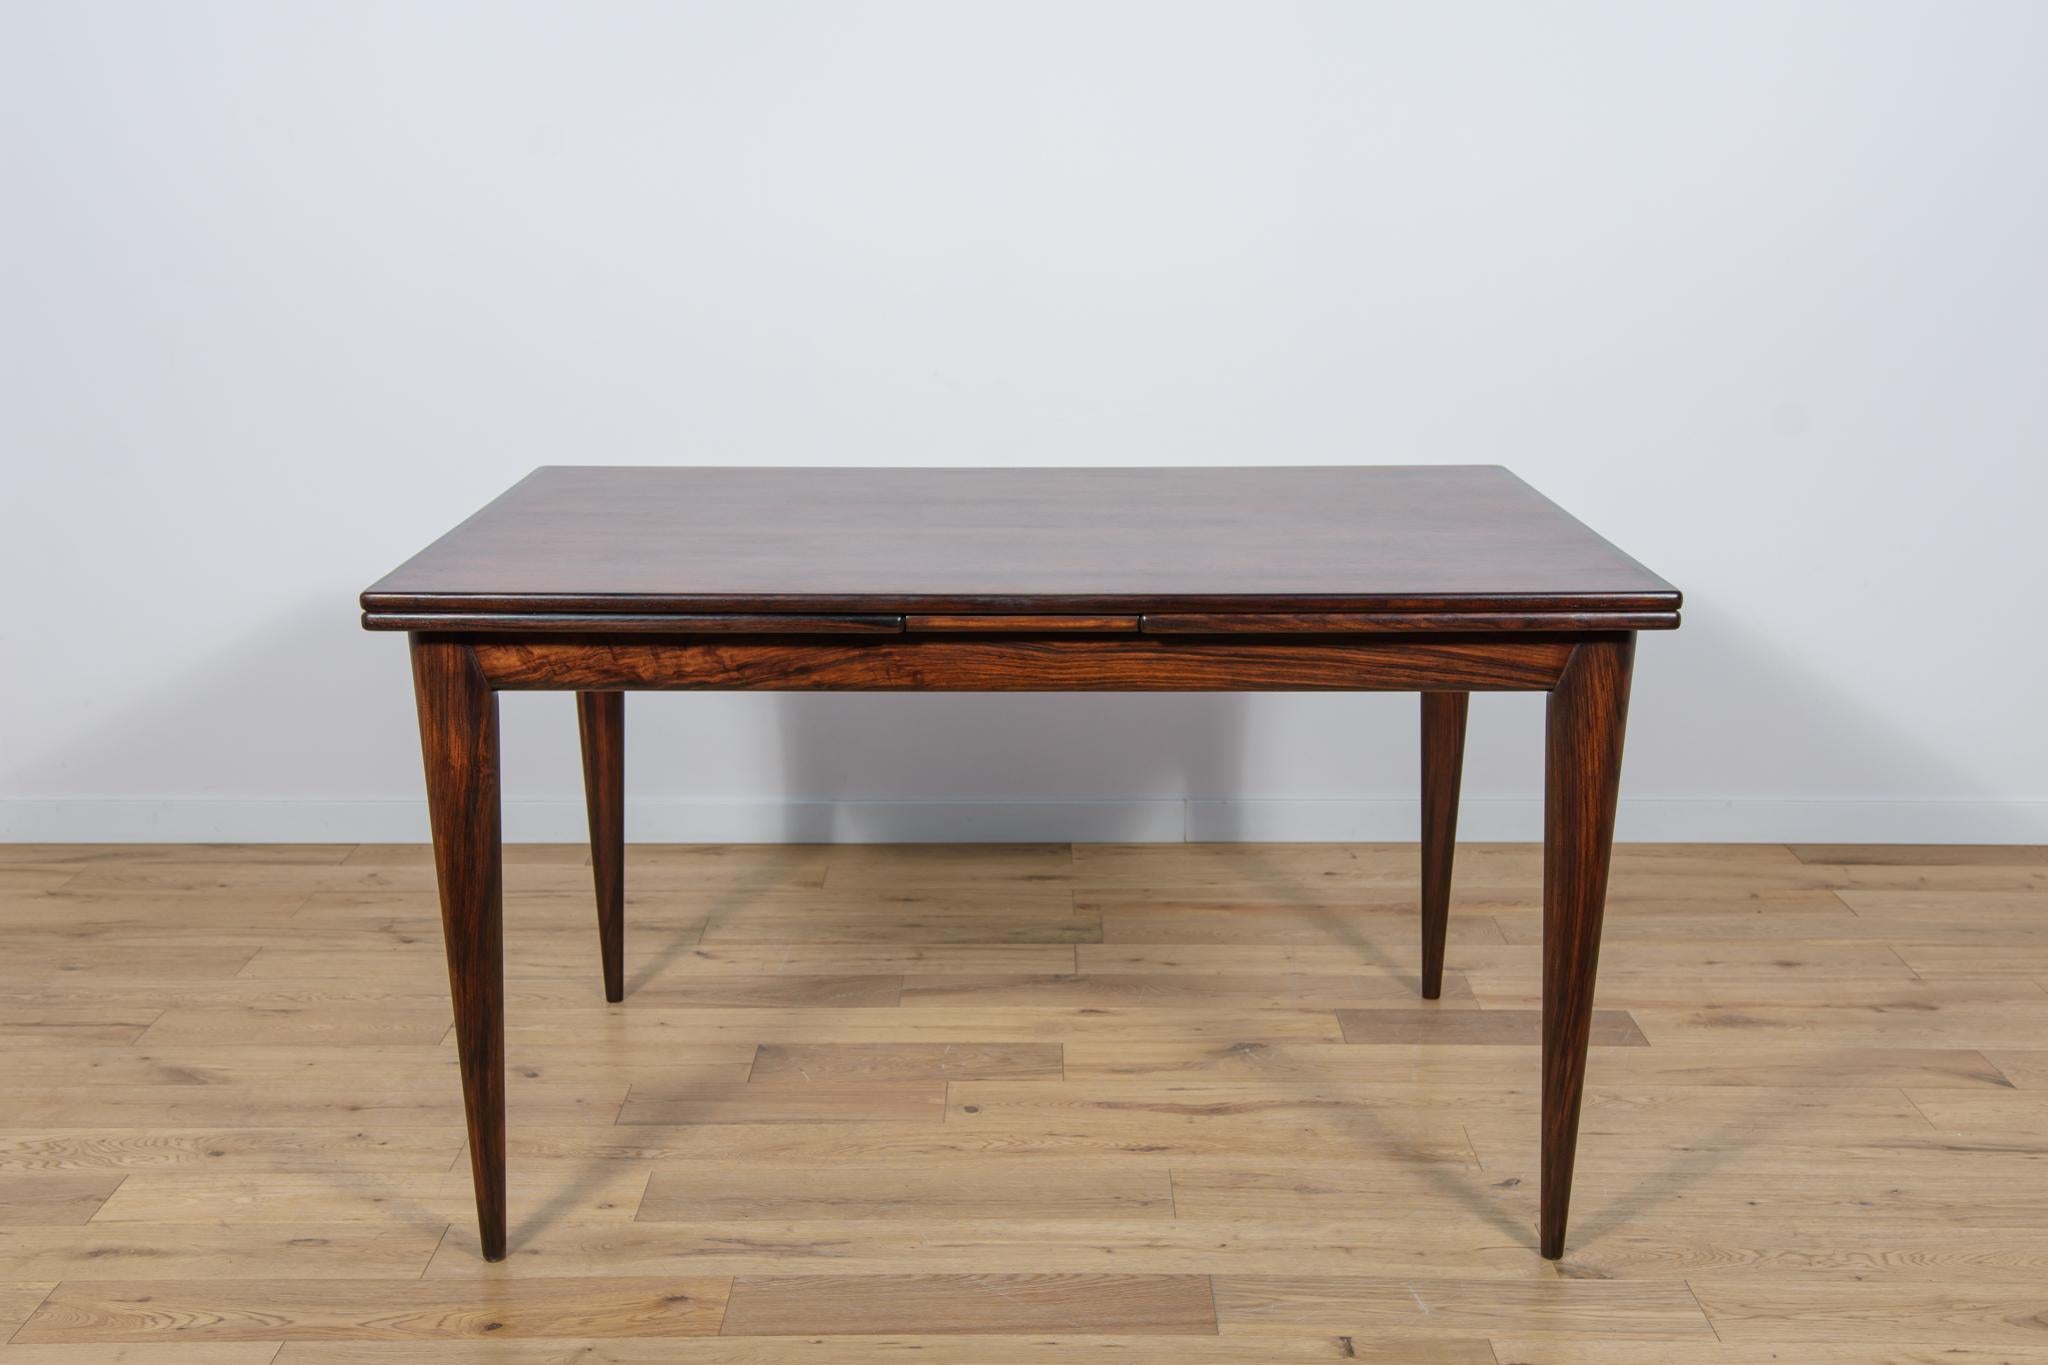 This rosewood model 254 dining table designed by Niels O. Møller was produced by J.L Møllers Møbelfabrik in Denmark during the 1950s.The table is characterized by original graining. The table has reinforced solid edges. The piece extends from 130 to